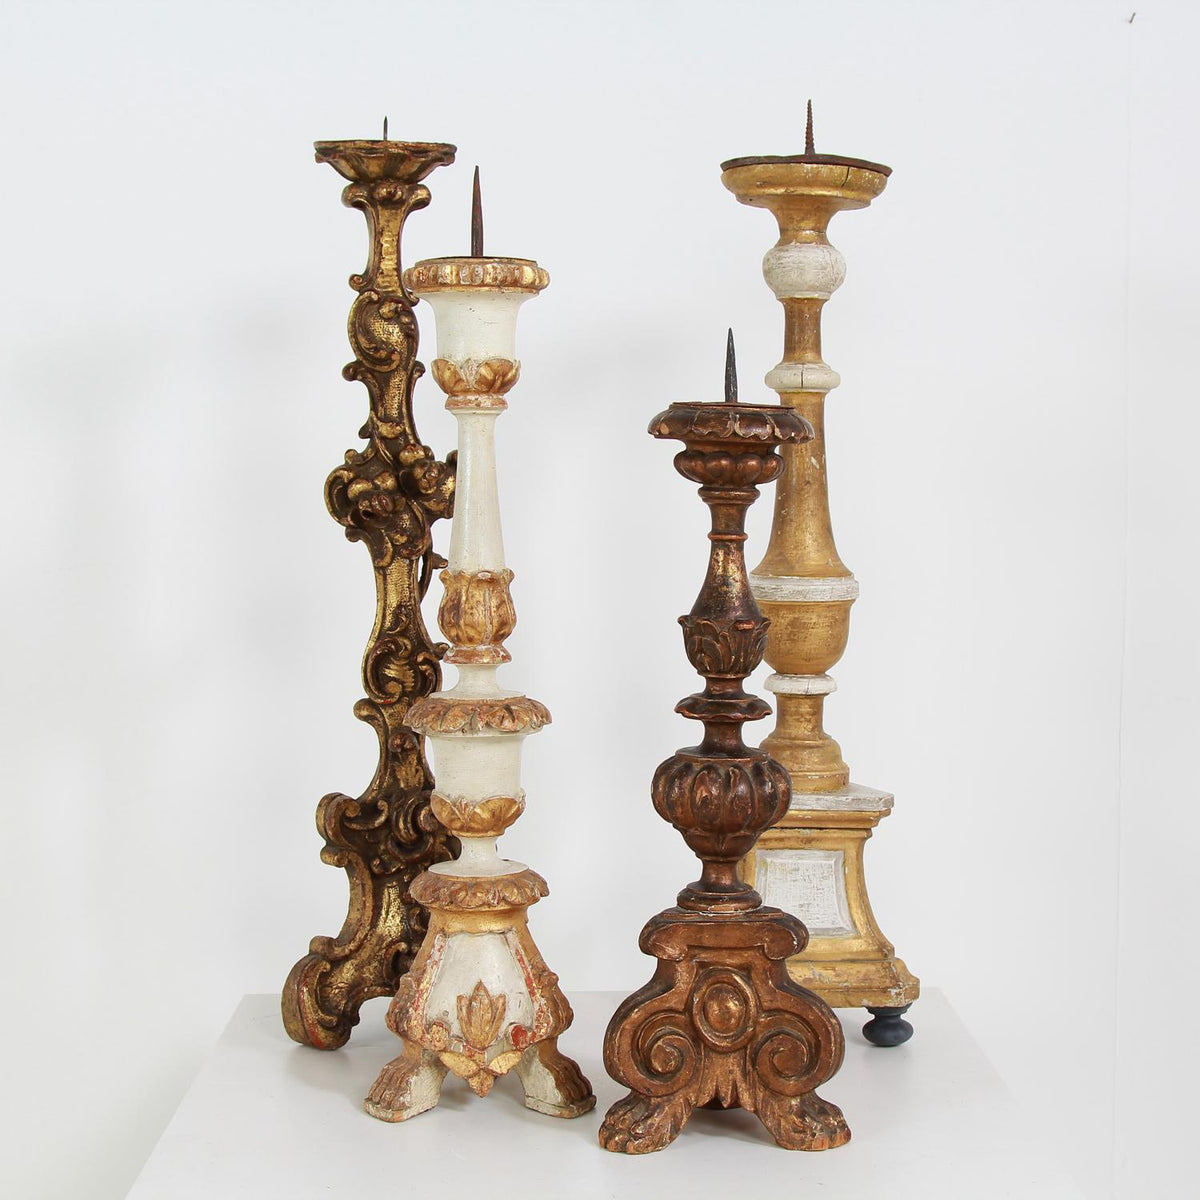 Italian 19th Century Carved Painted Pricket Candlestick